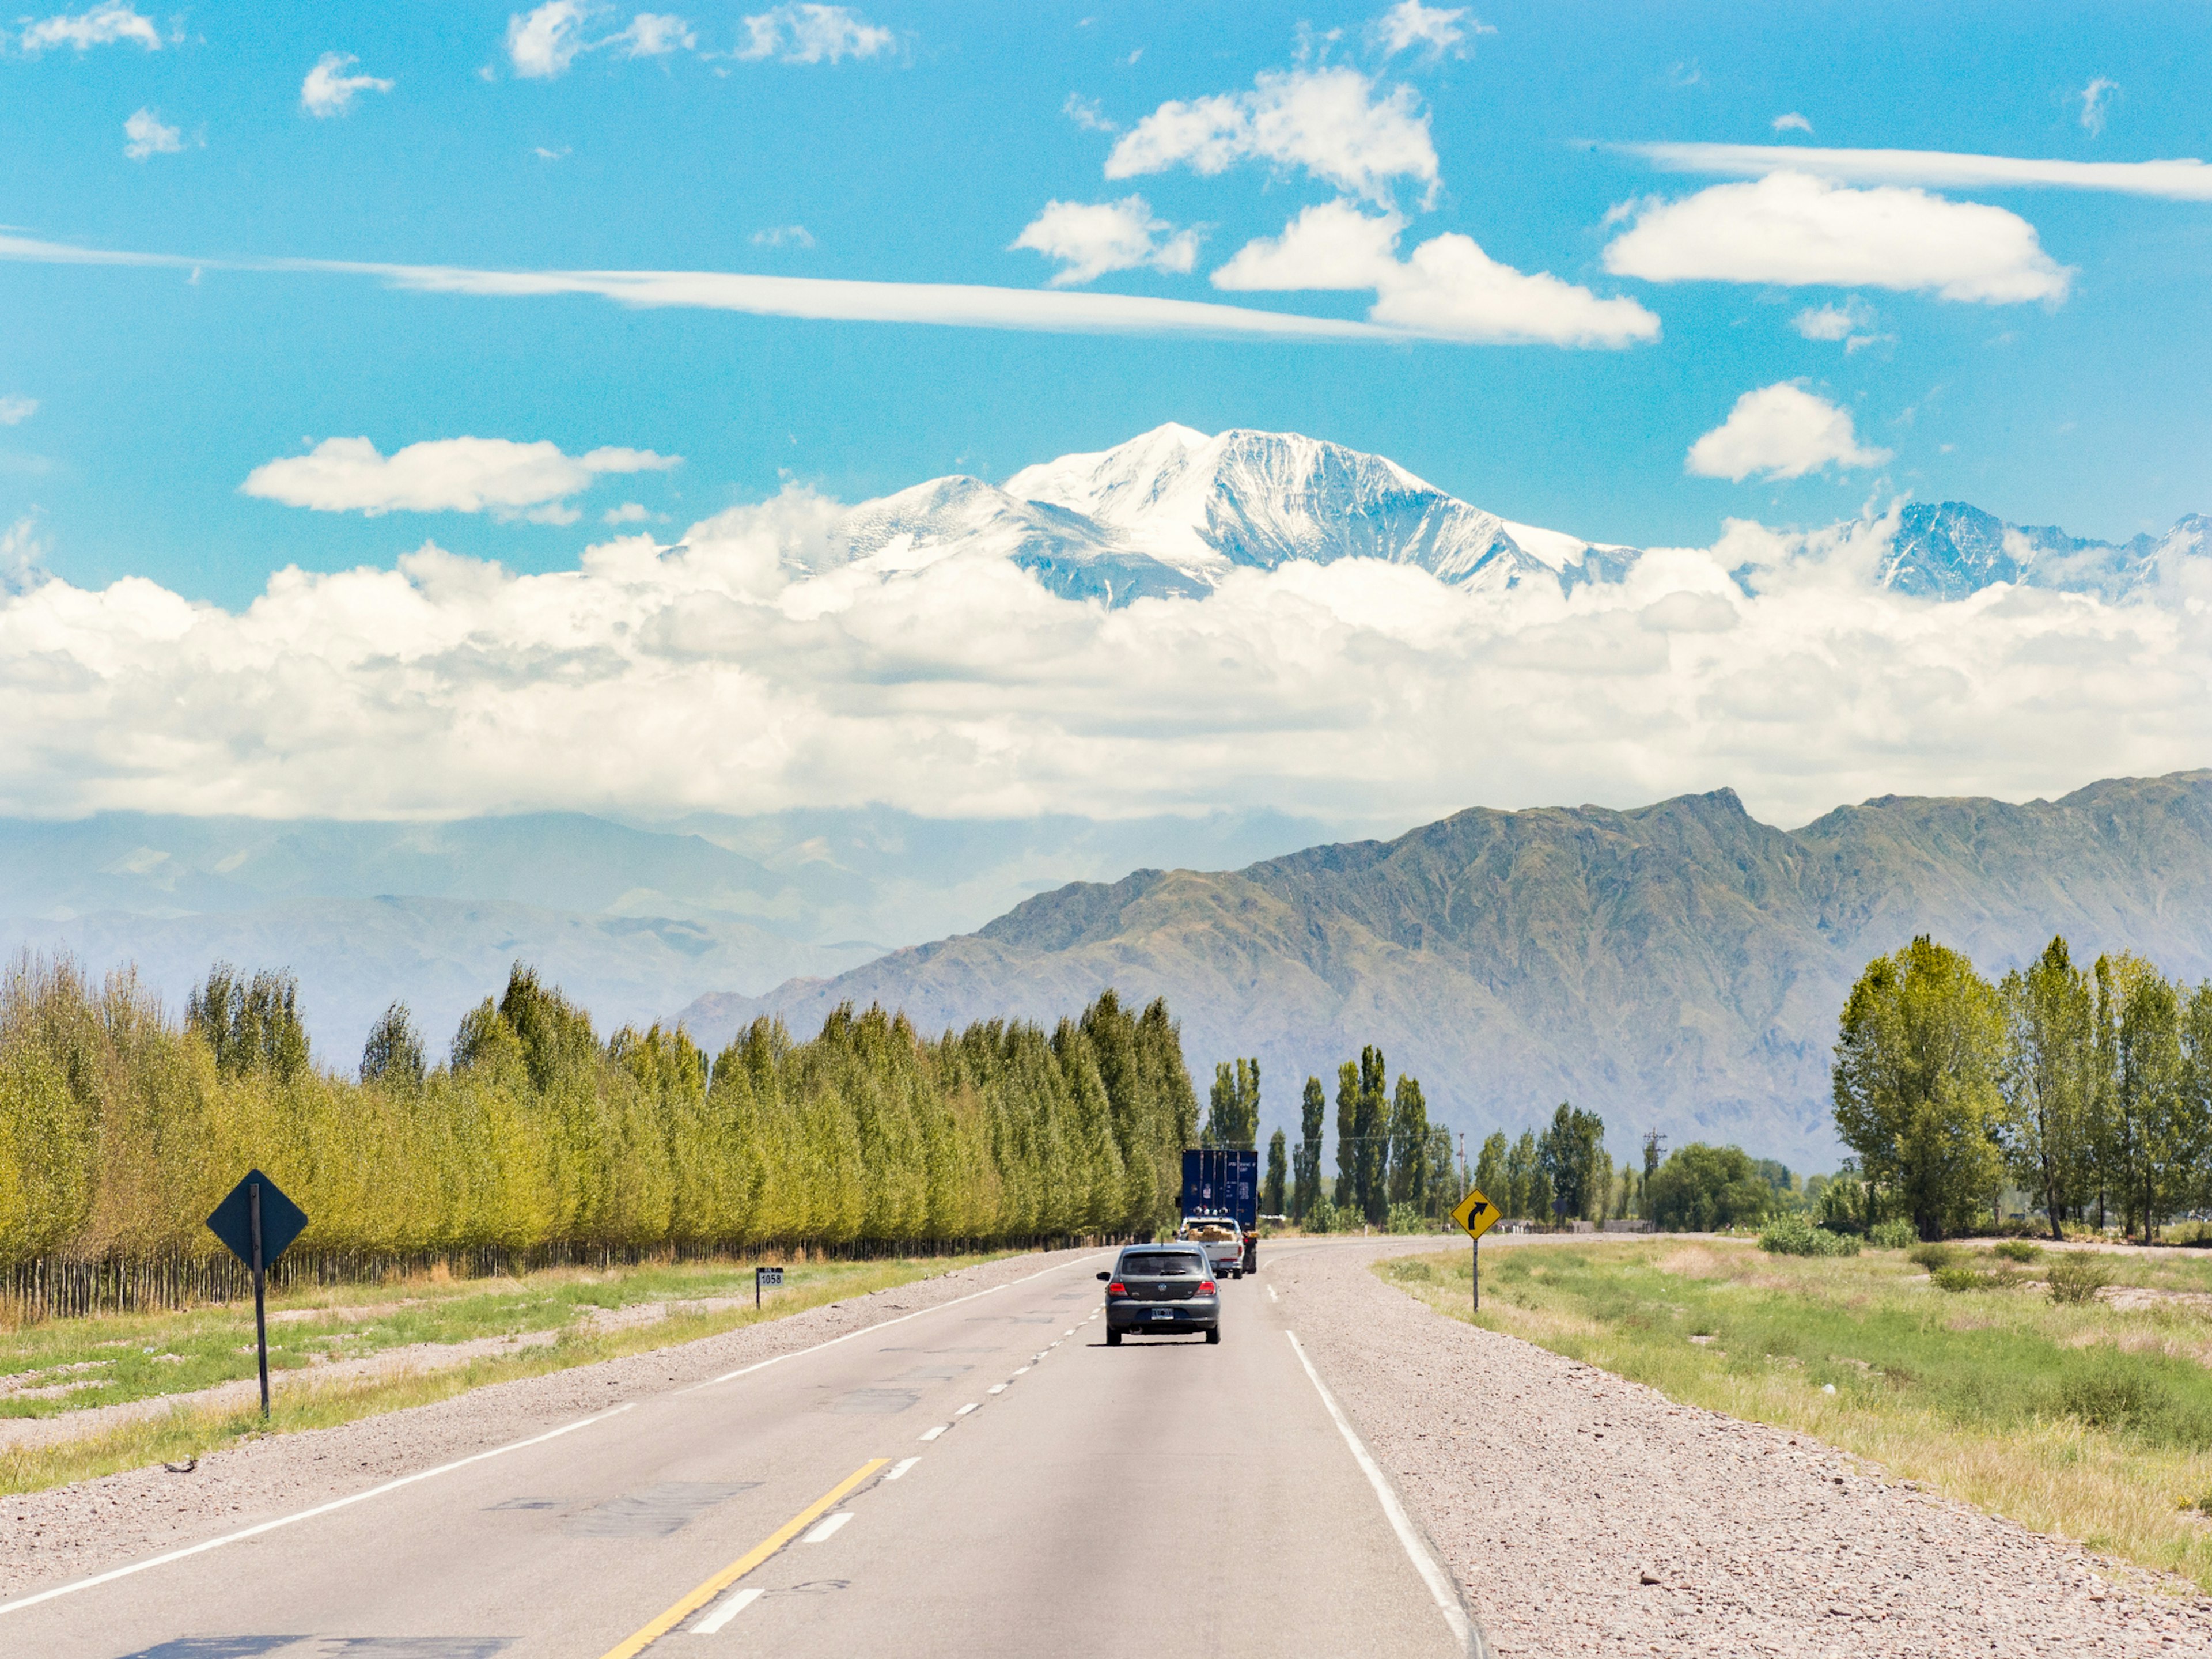 Mendoza, Argentina - February 13, 2013: Vehicles driving through the road and the view of the landscape near Mendoza, Argentina.